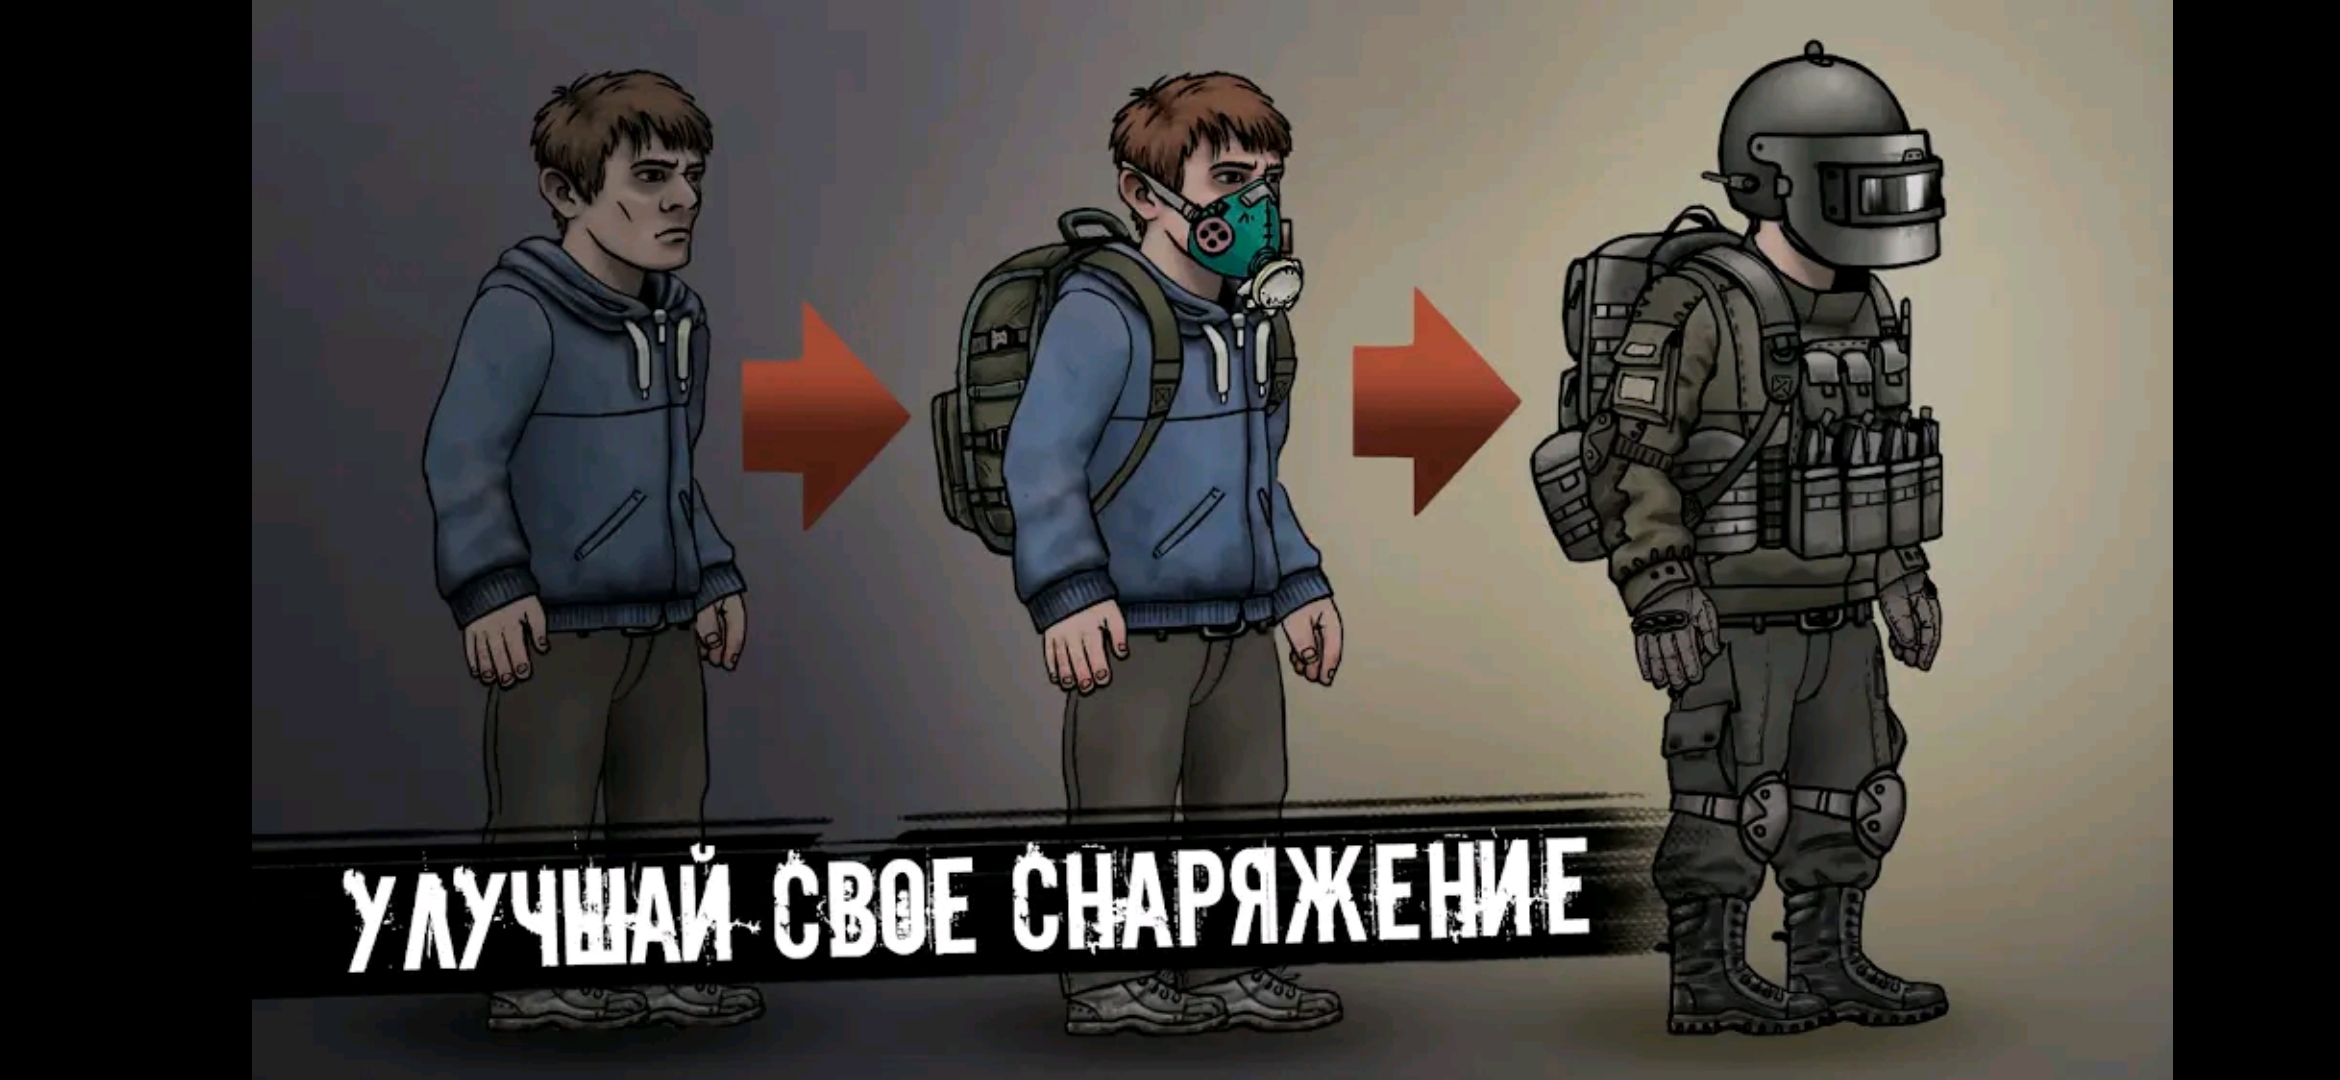 Игра nuclear day survival. Nuclear Day. Nuclear Day щиток. Nuclear игра. Игра Нуклеар дей.